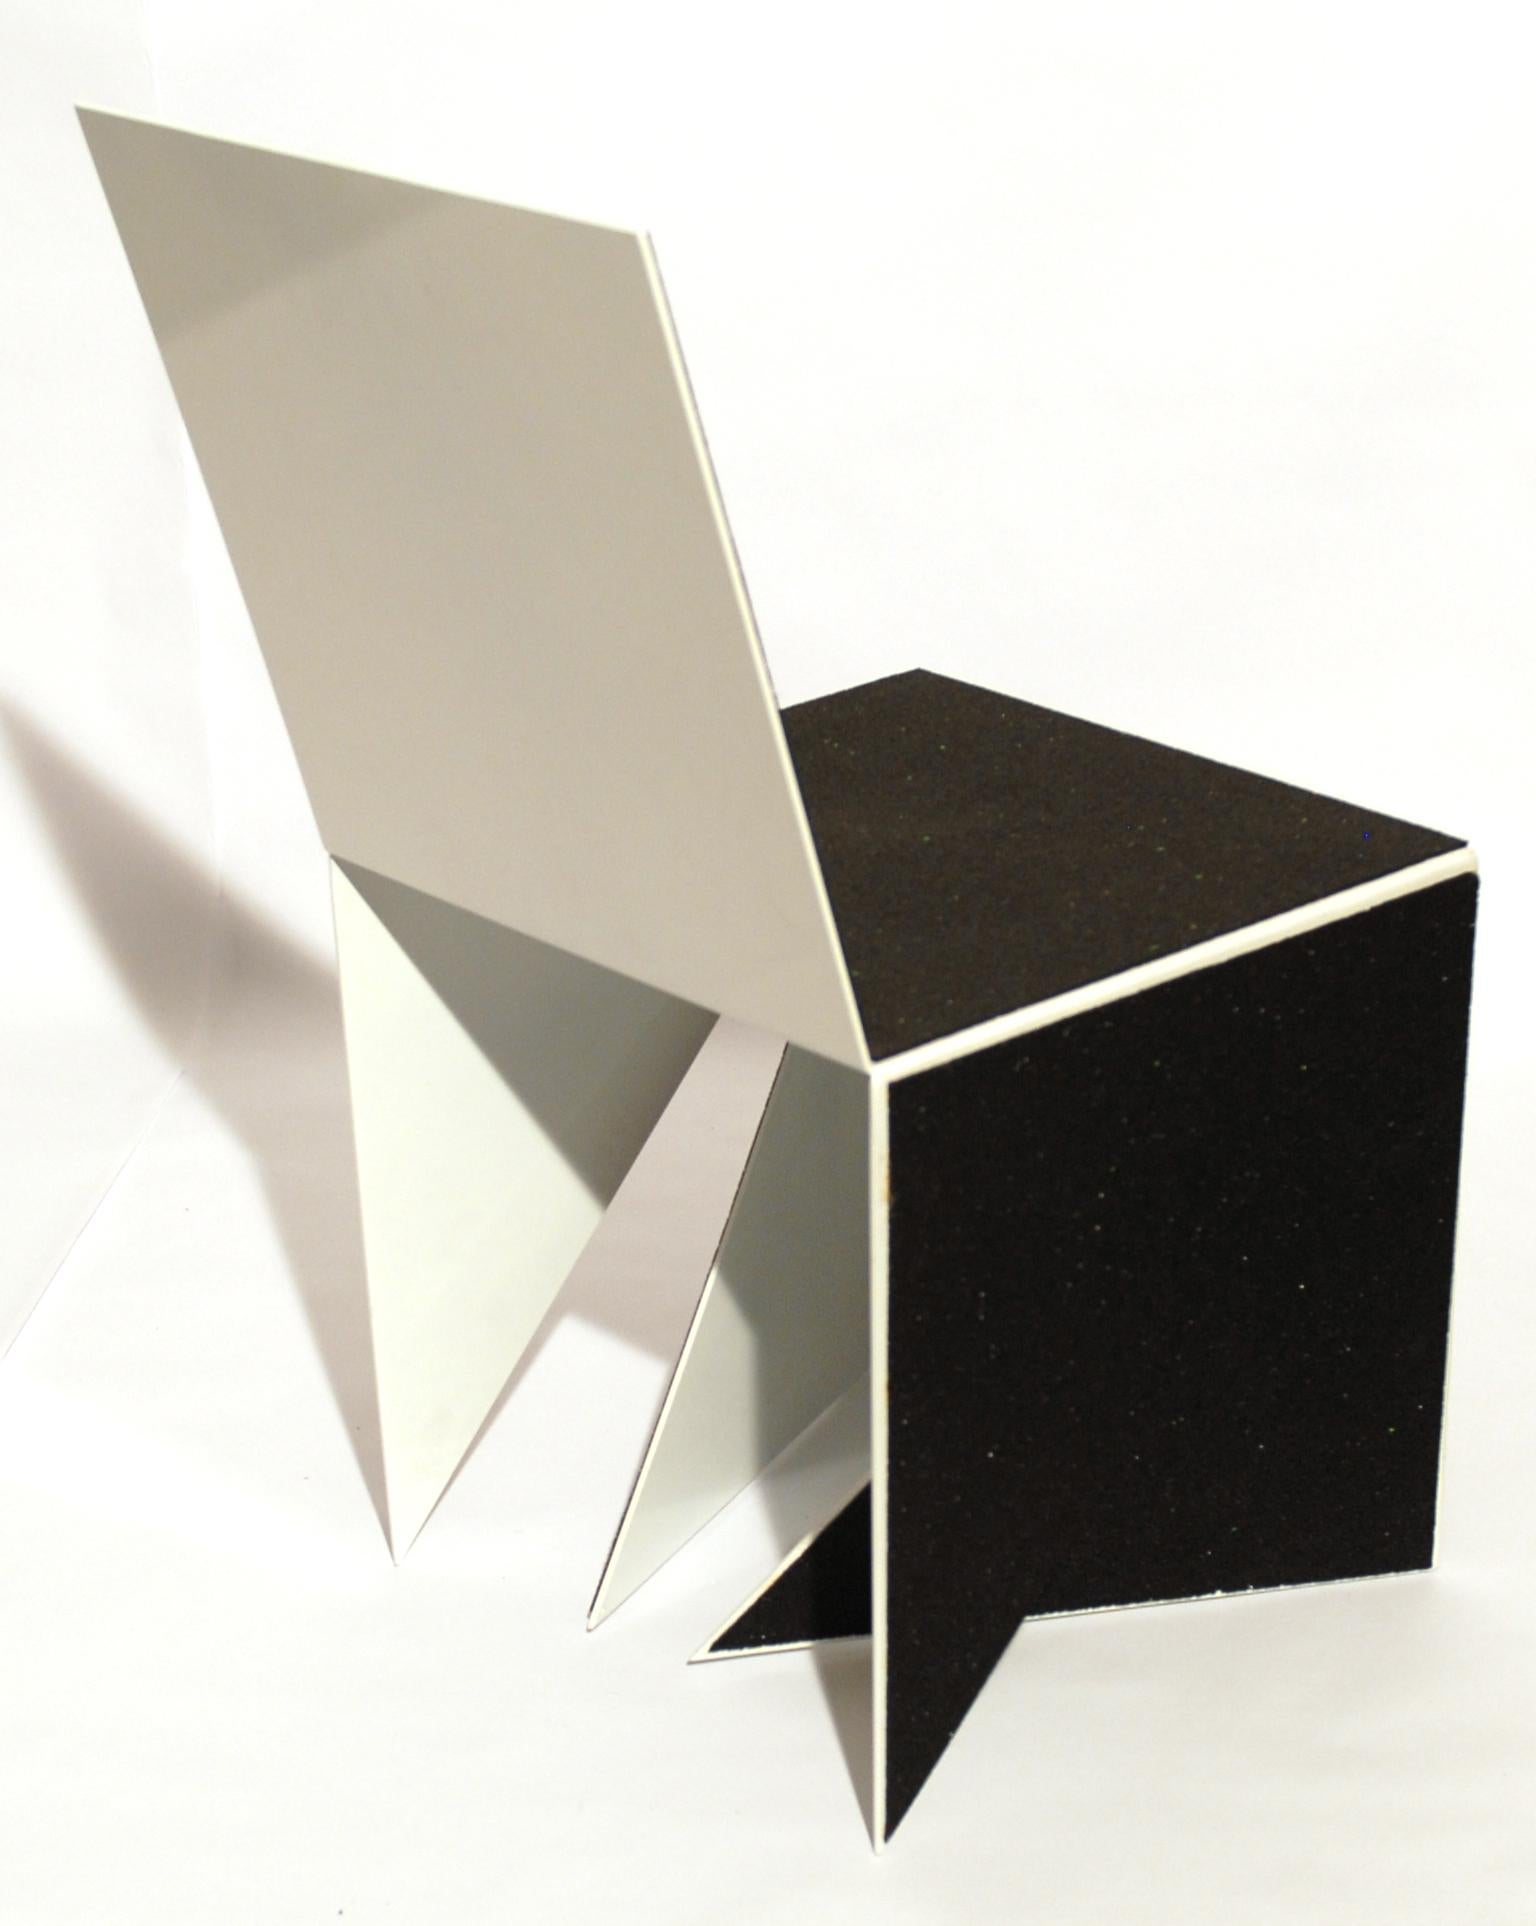 Casulo Cube #2 by Mameluca
Material: Electrostatic Aluminum paint, recycled rubber blanket.
Dimensions: D 45 x W 45 x H 90 cm
Also available in different dimensions.

Opening a cube and transforming it into a plan was the starting point for the